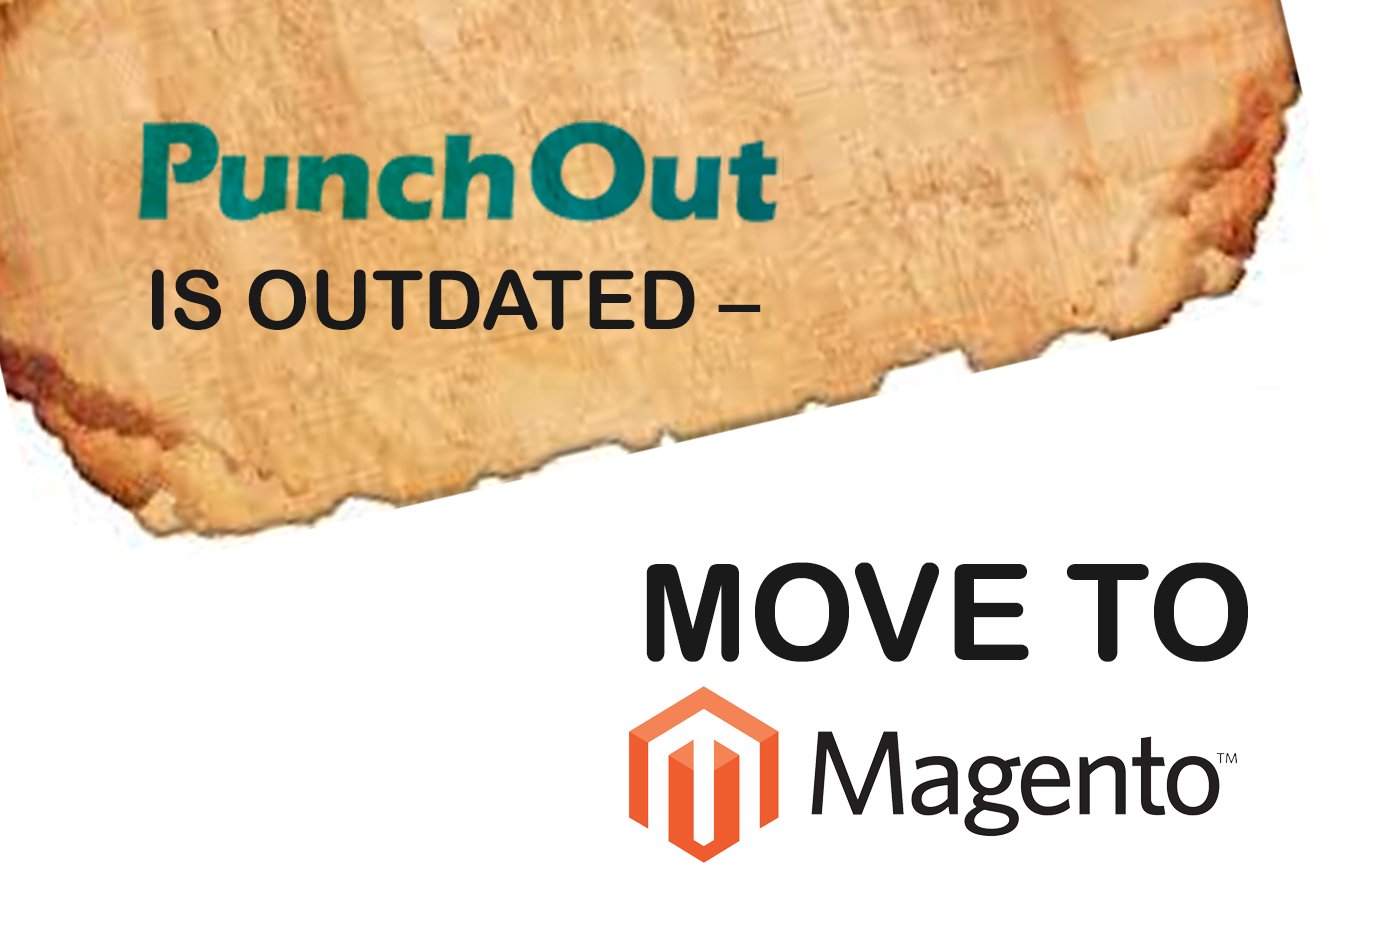 punchout-is-outdated-move-to-magento_featured